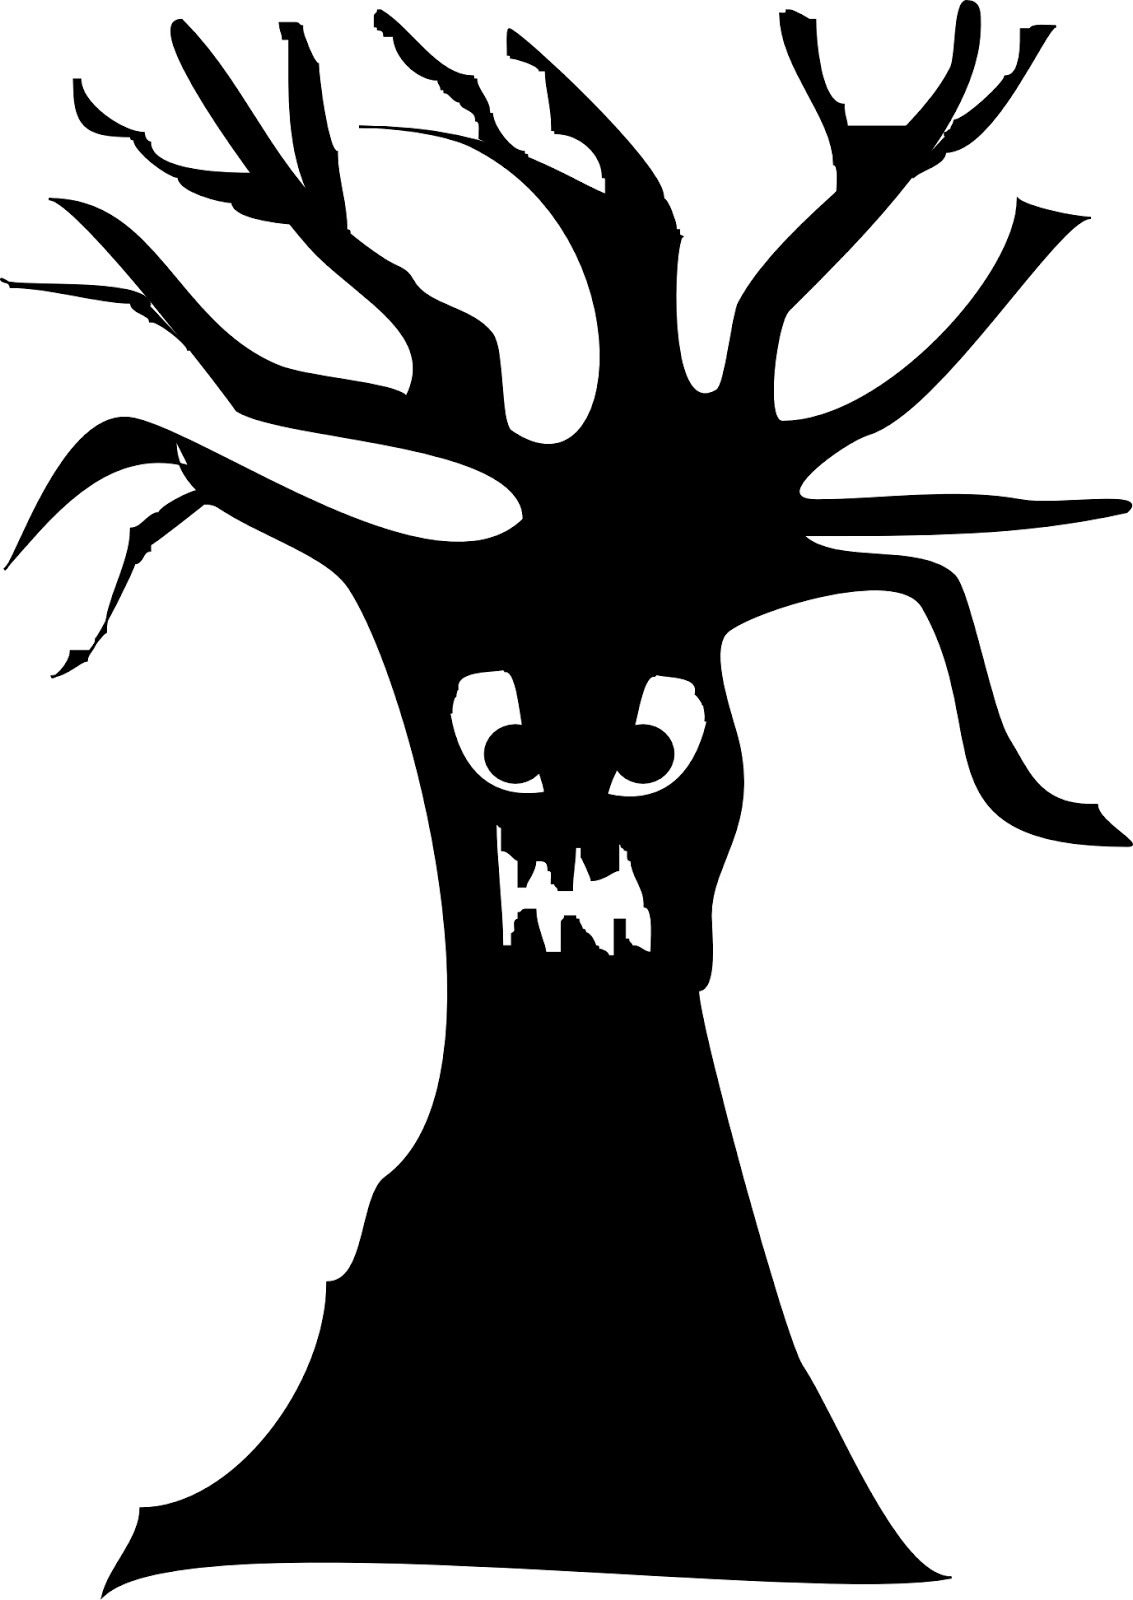 Scary Tree Silhouette - Clipart library